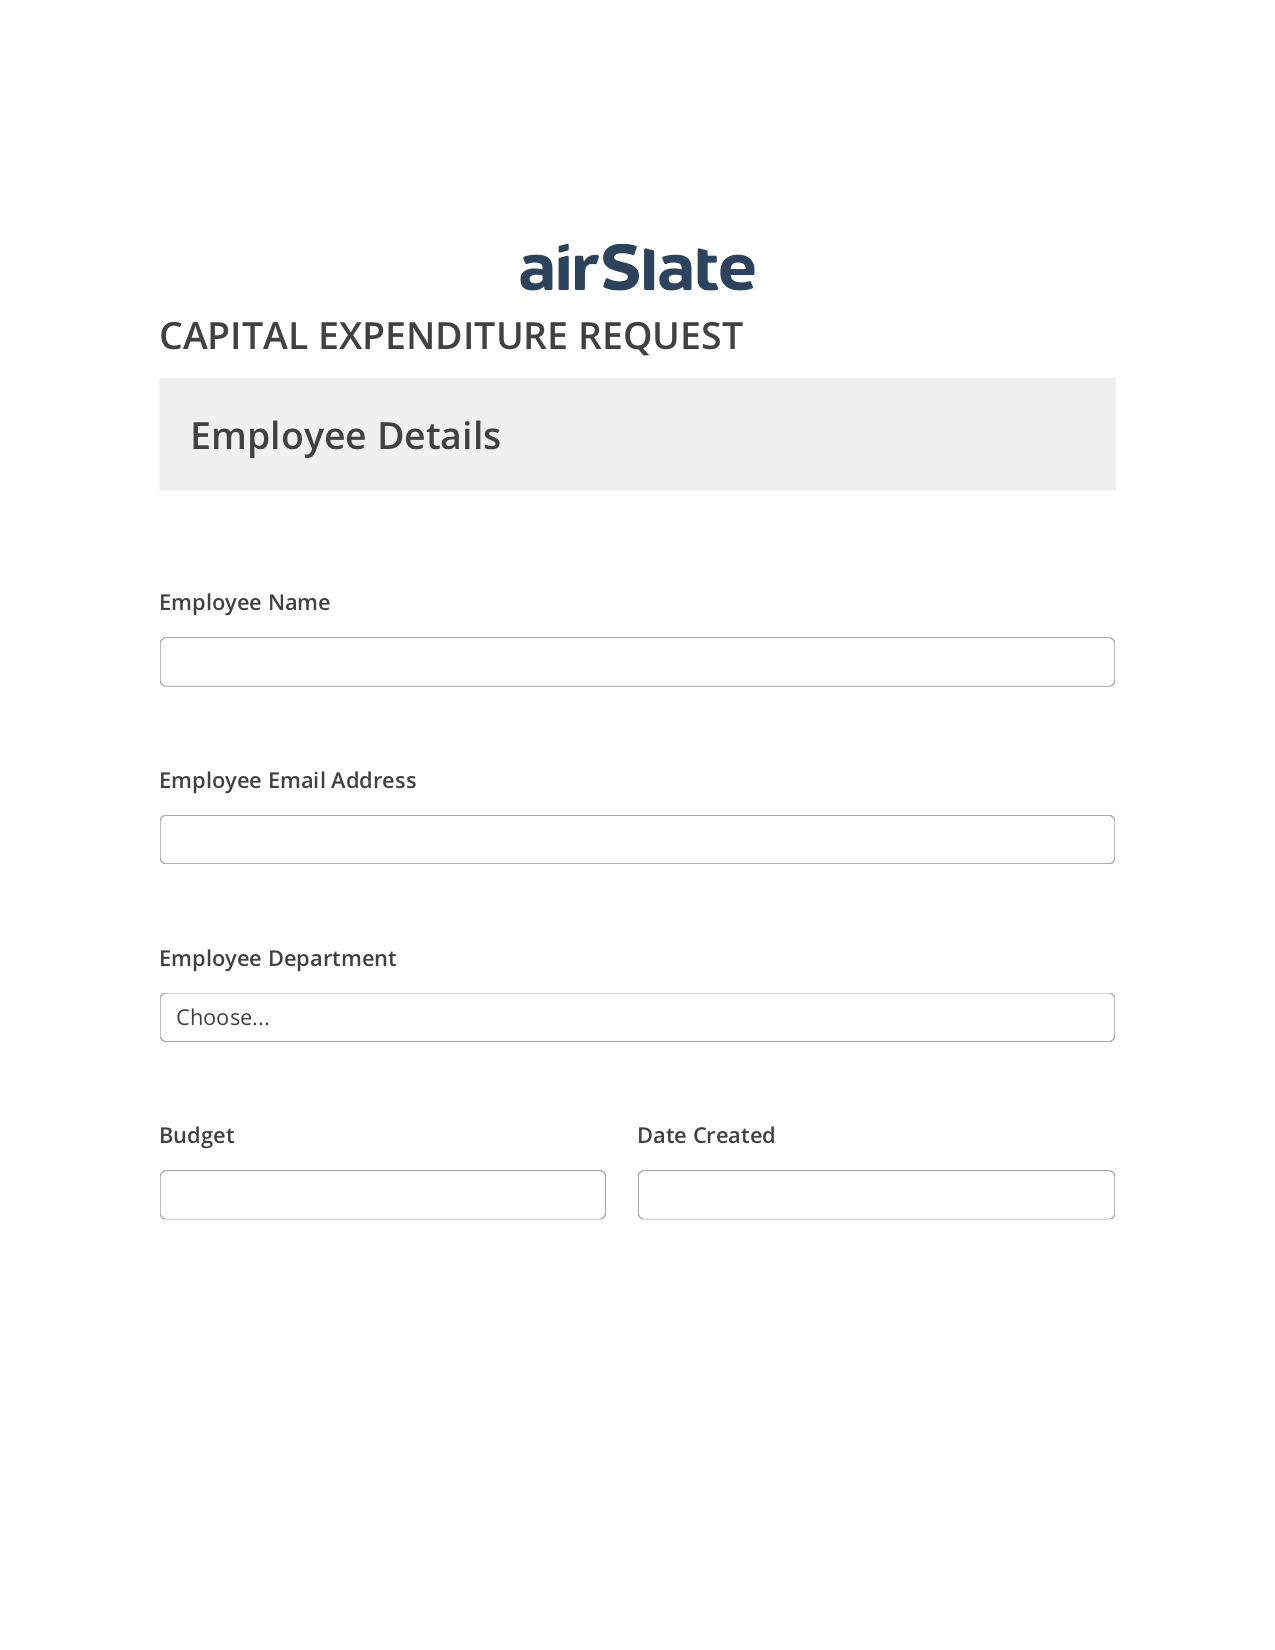 Capital Expenditure Request Approval Workflow Pre-fill from Excel Spreadsheet Bot, Email Notification Bot, Export to NetSuite